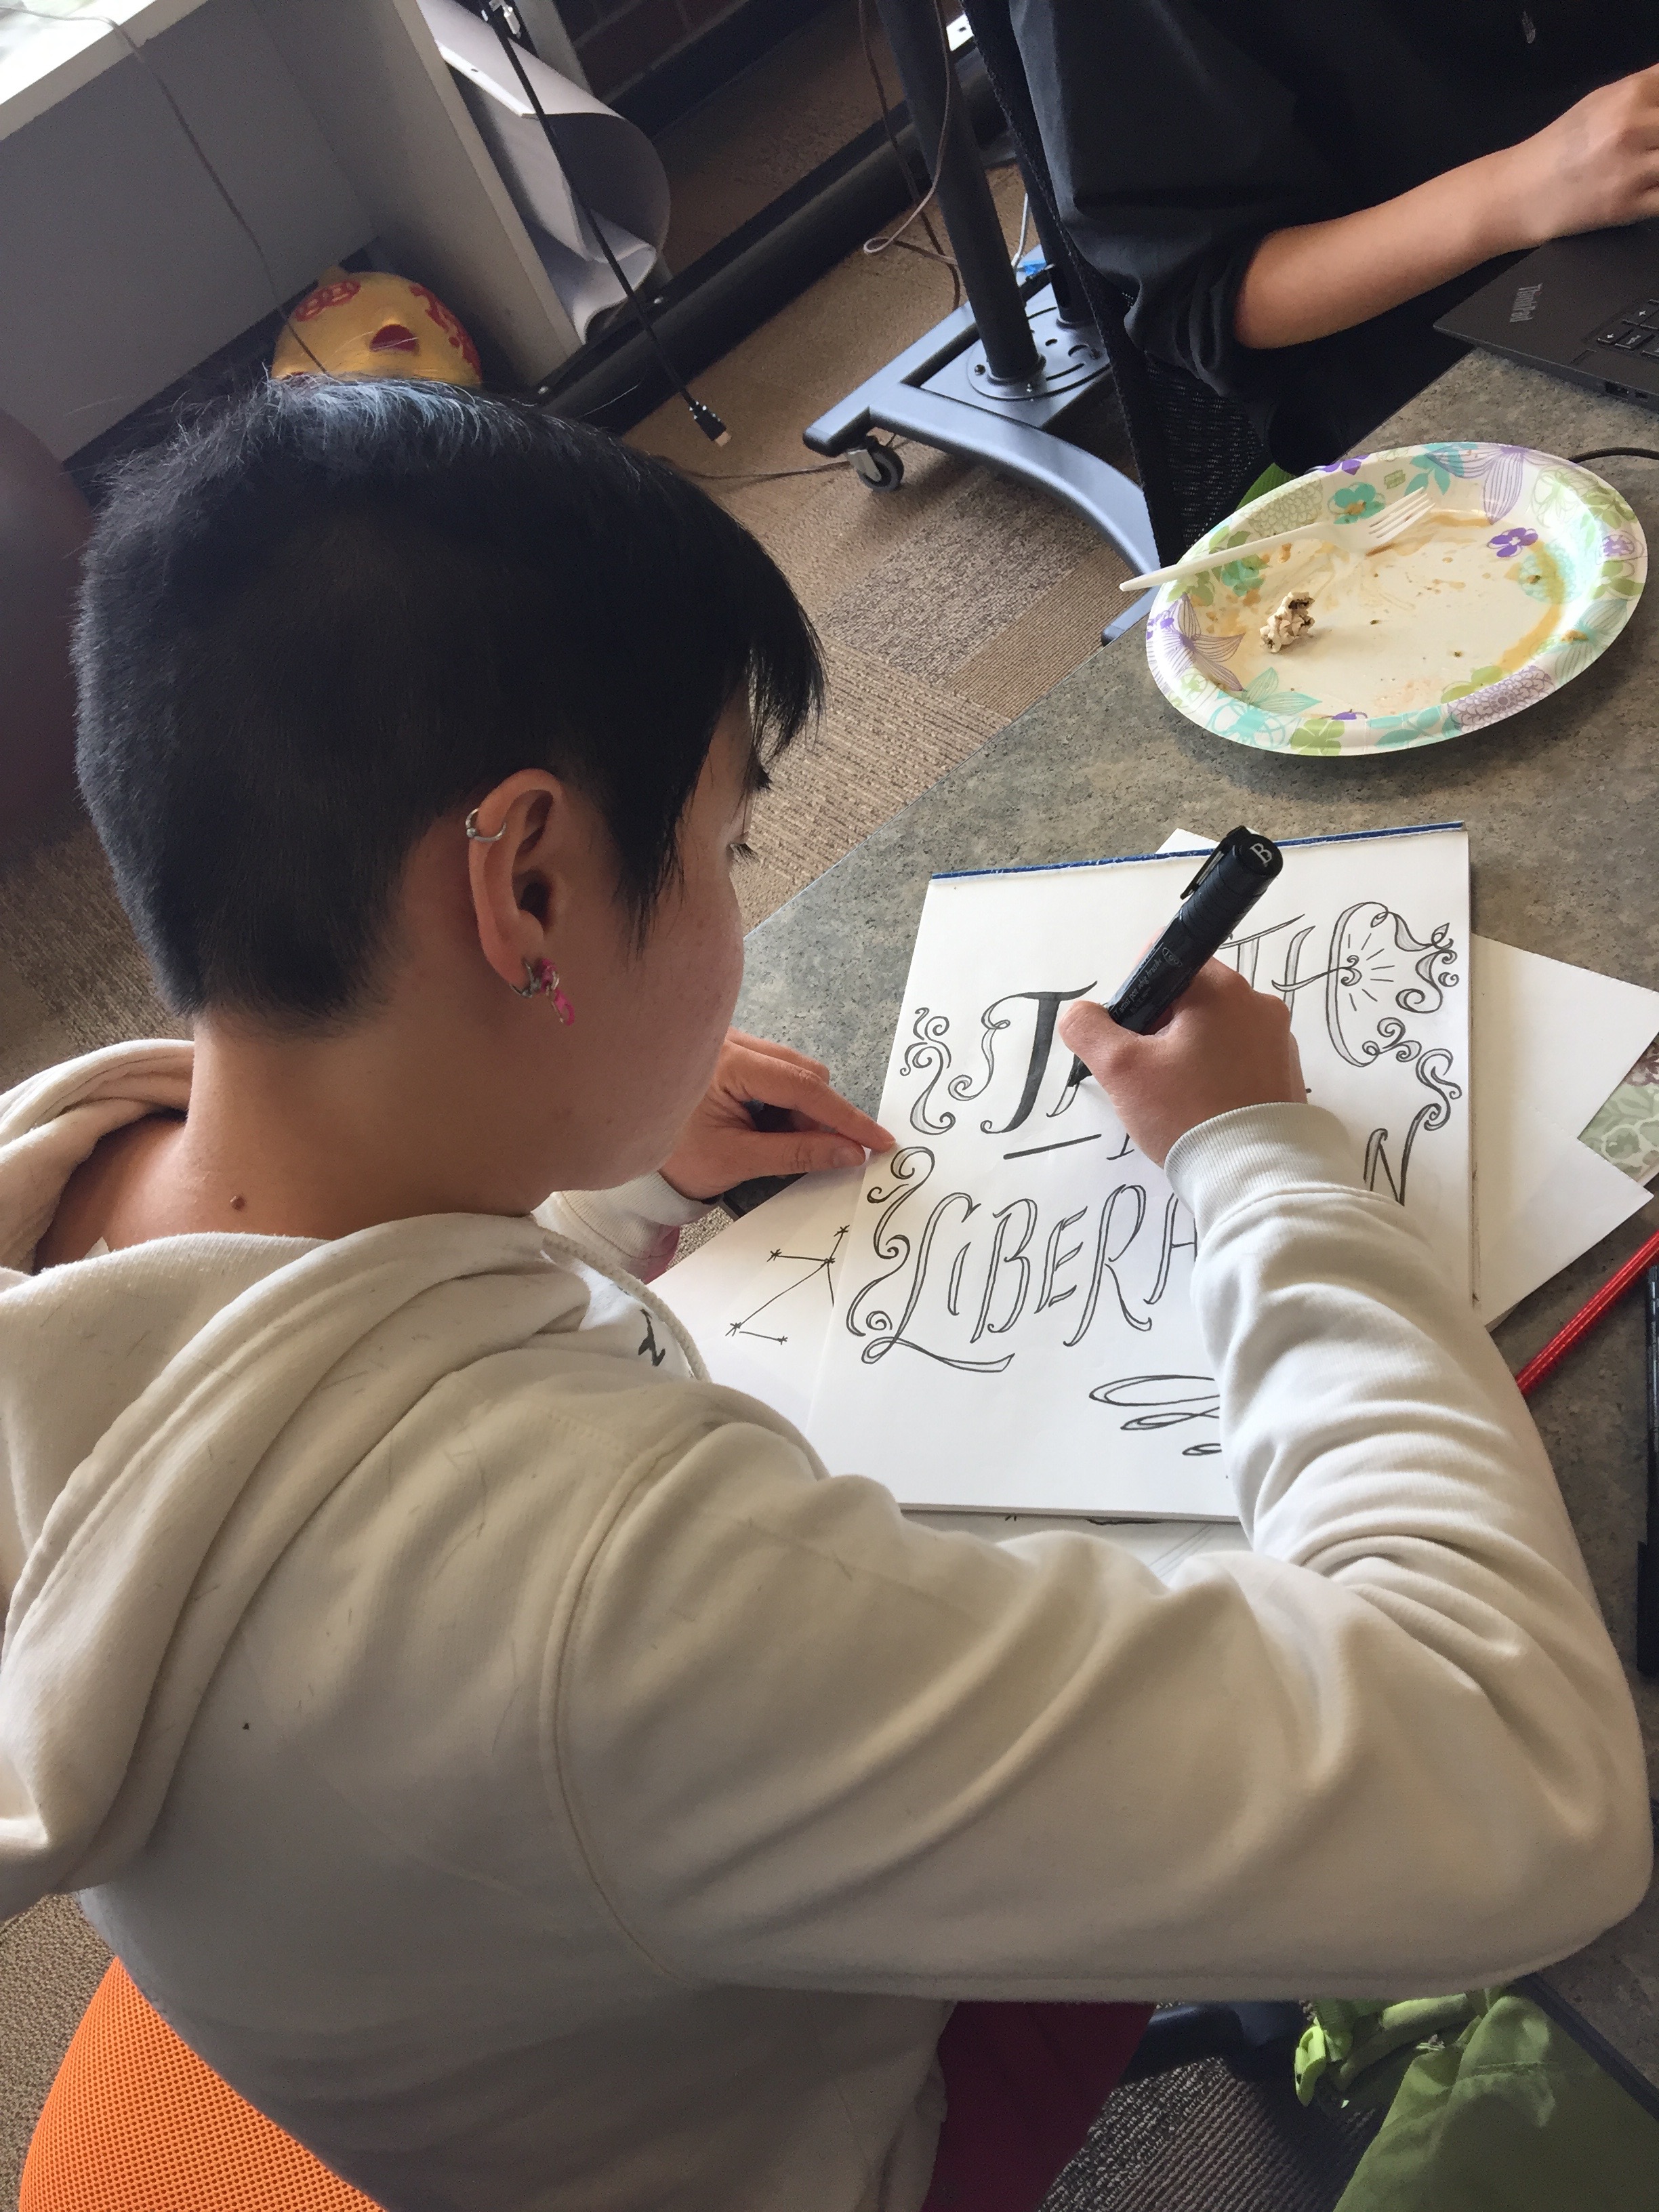 Image Description: A person with short hair and a white sweatshirt is drawing an image with the words "Truth is Liberation"